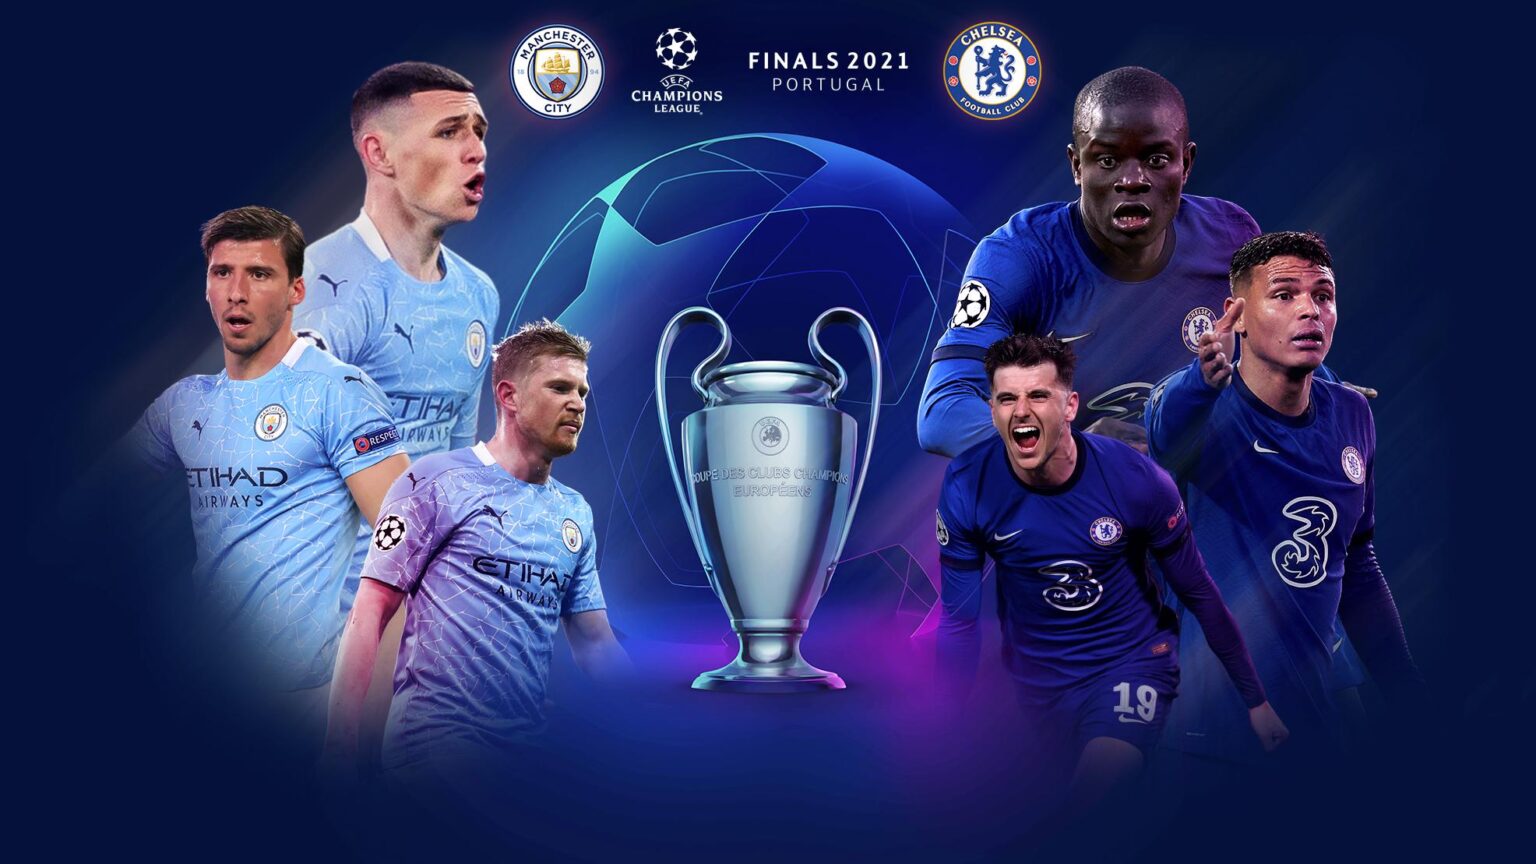 a guide to the meeting between Manchester City and Chelsea champions league Chelsea v man City pre-match build up